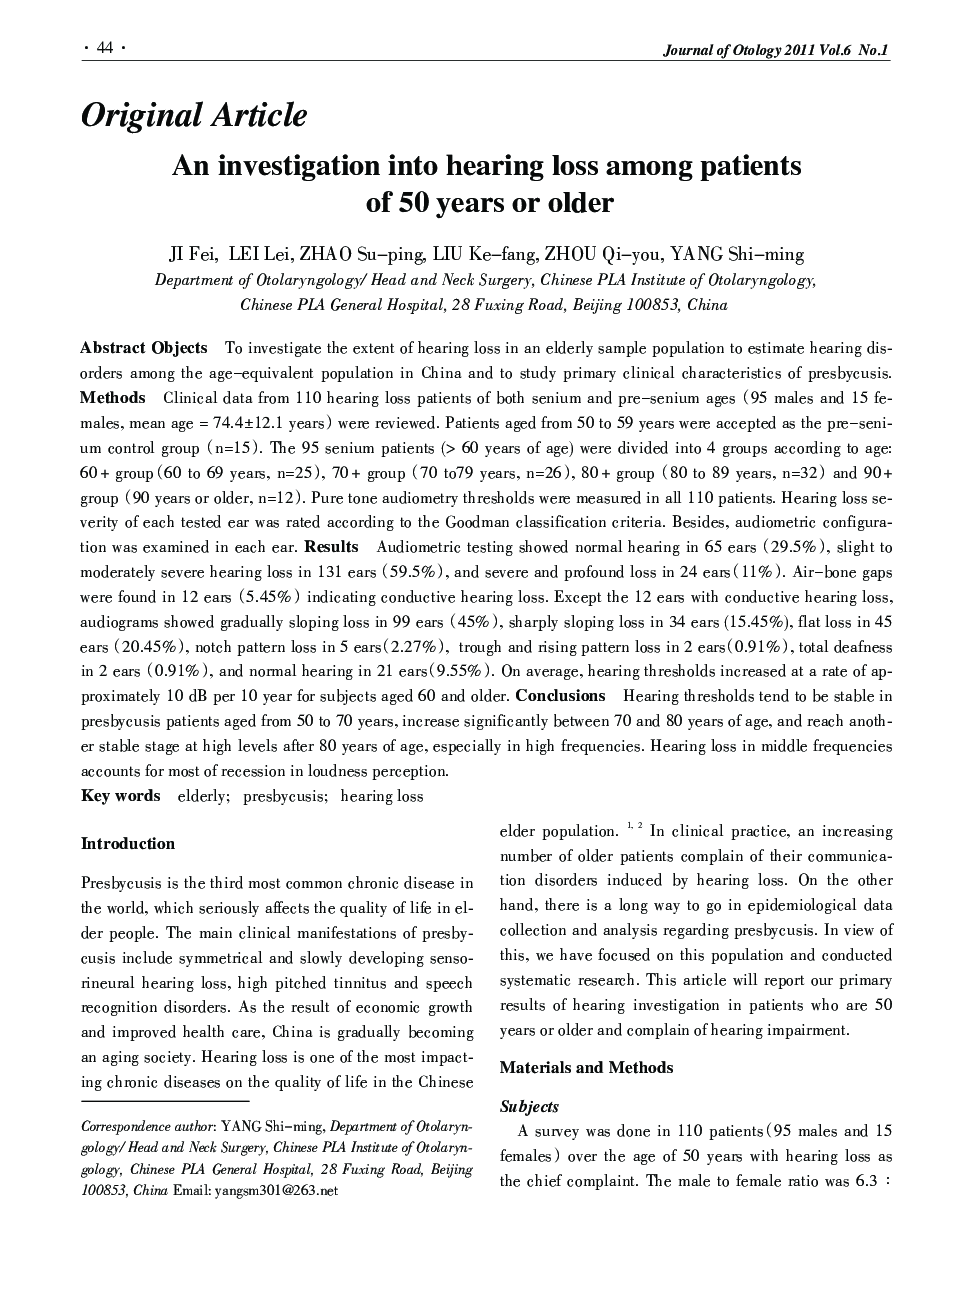 An investigation into hearing loss among patients of 50 years or older